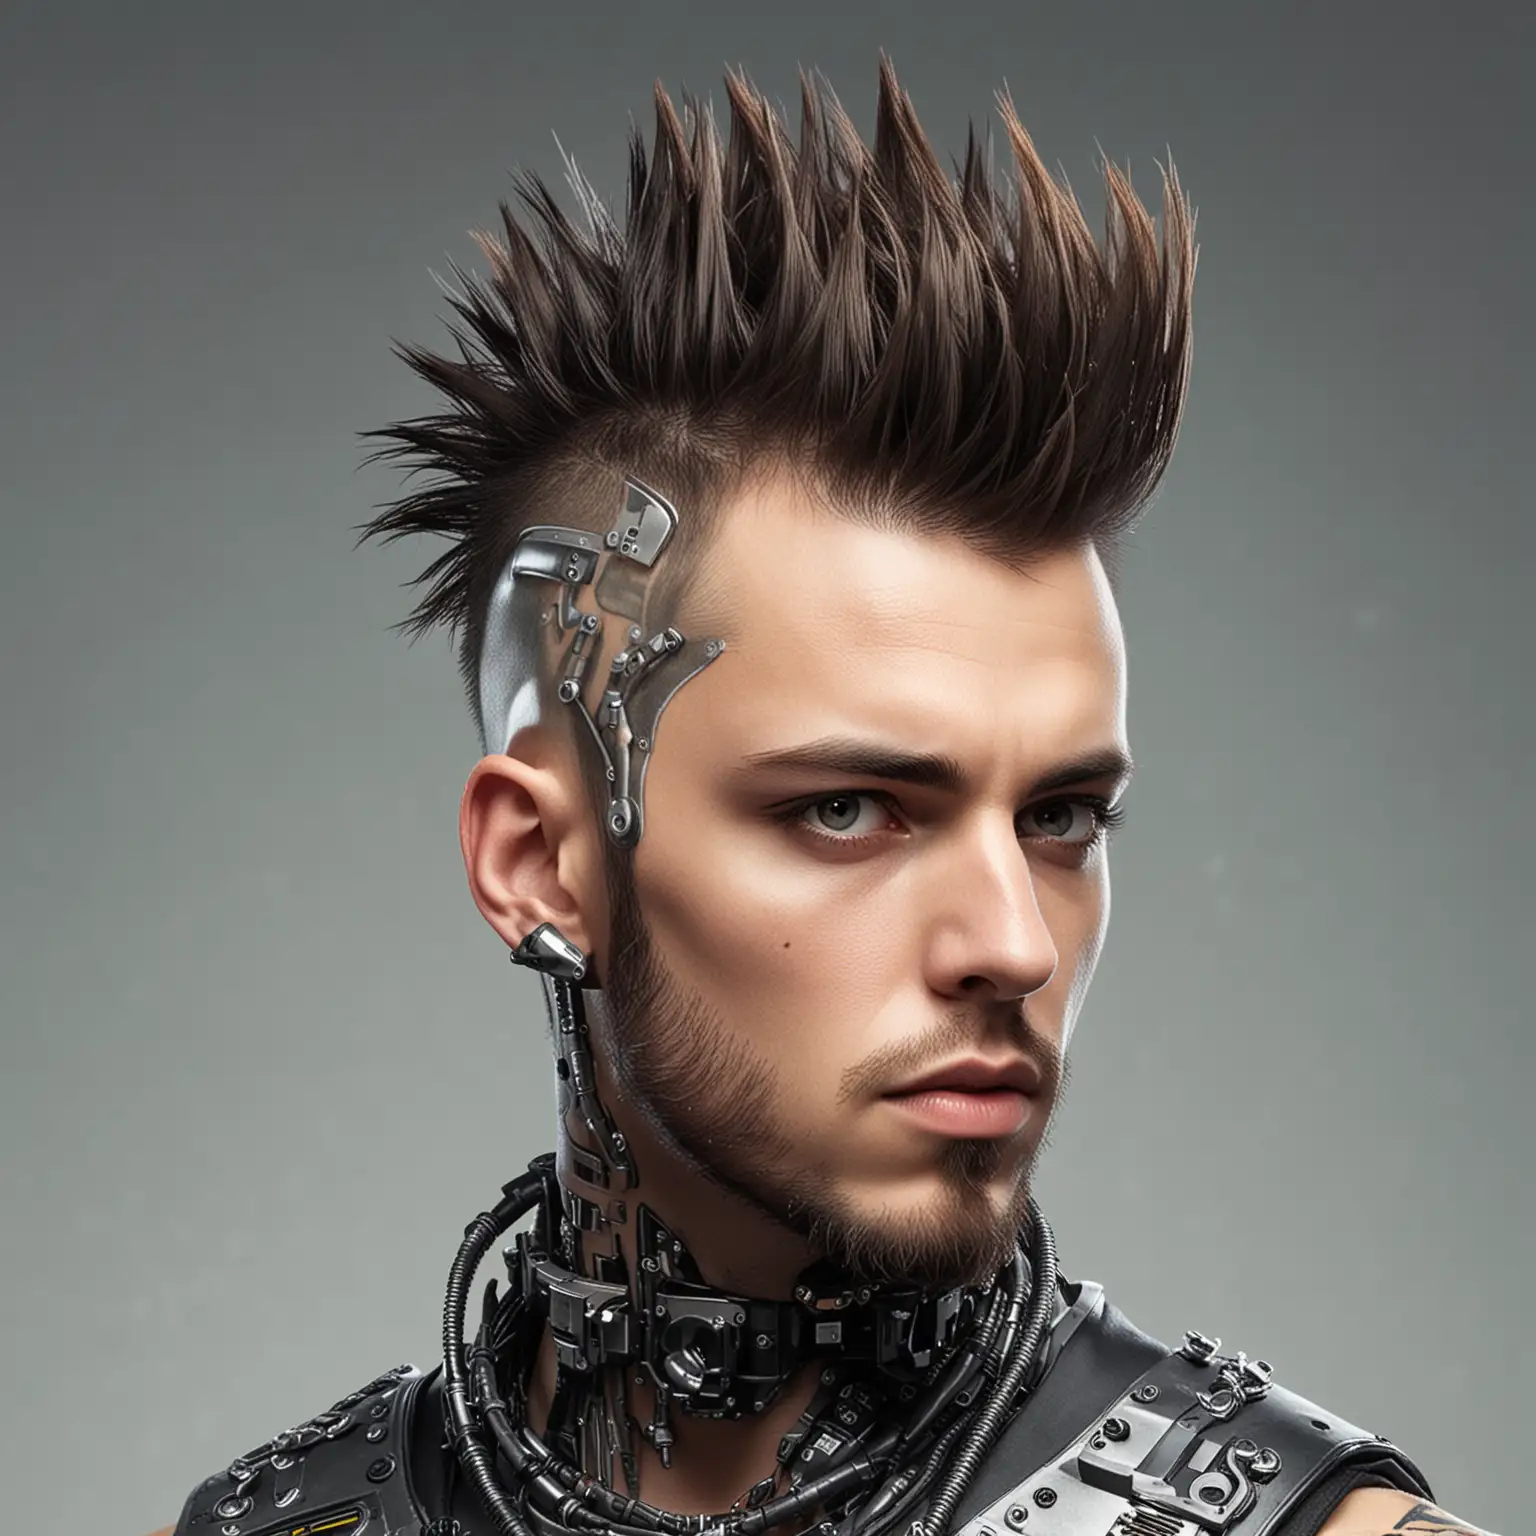 A male punk cyborg with a mowhawk and a beard